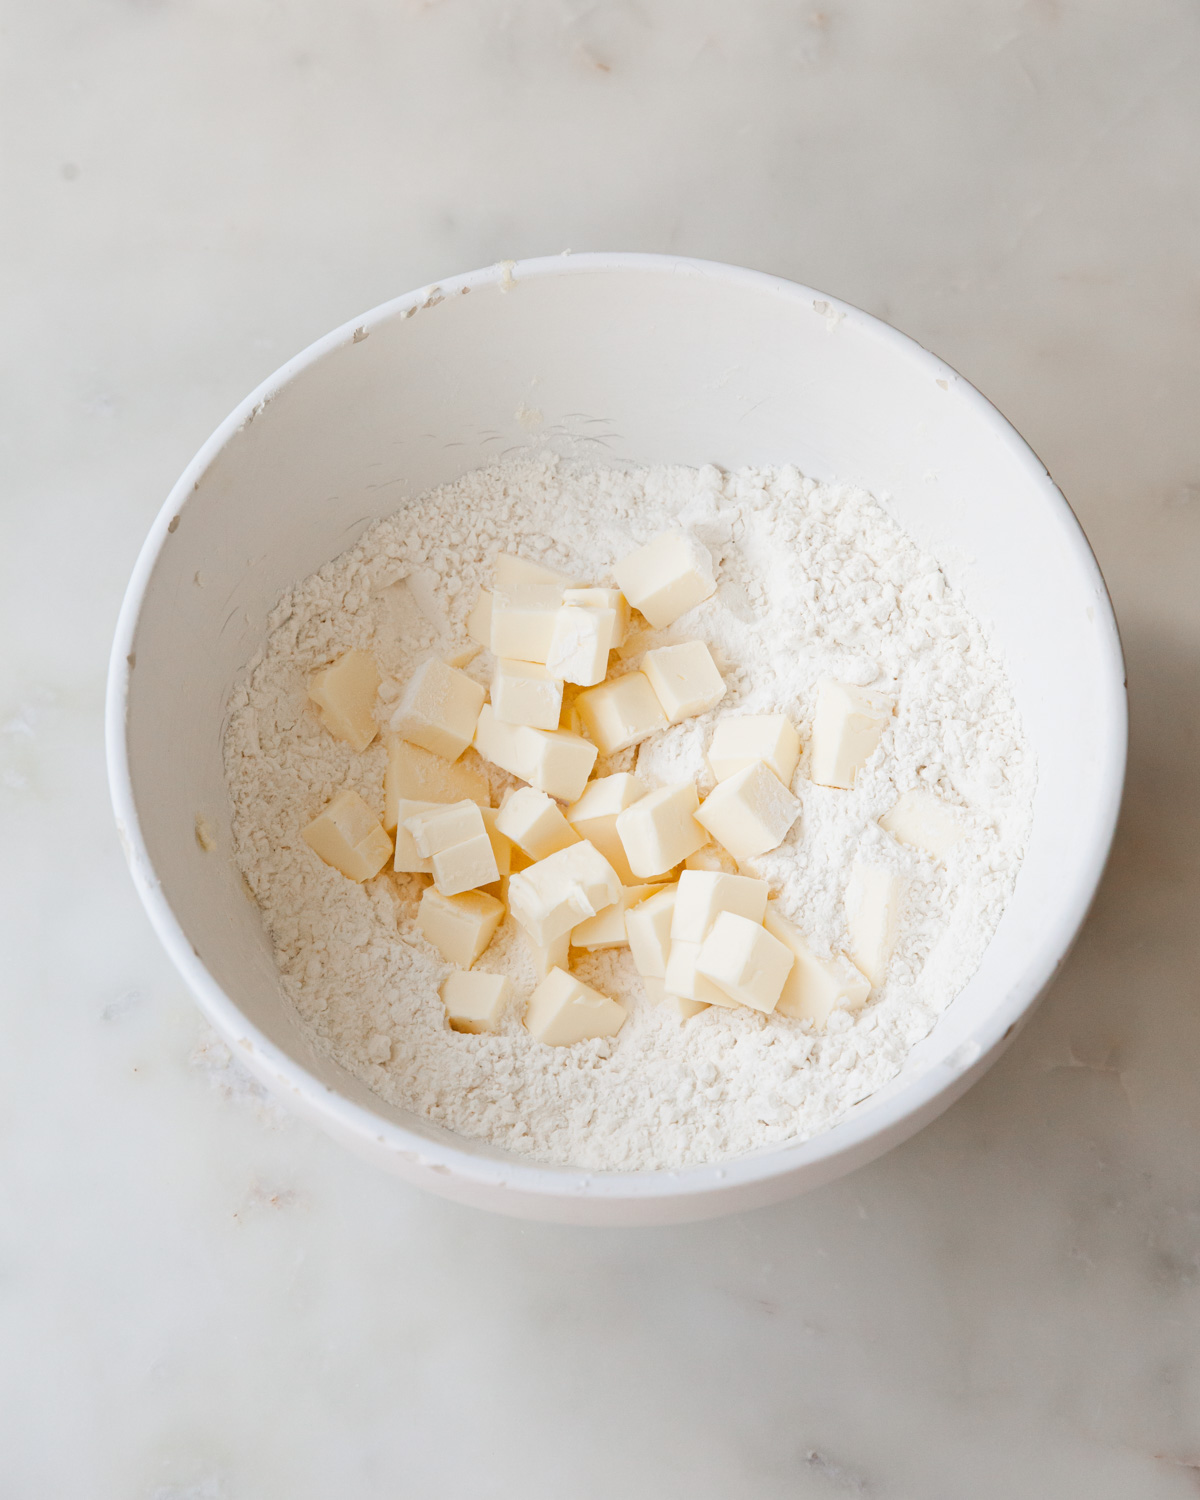 Cubed butter in a bowl of flour to make pie dough